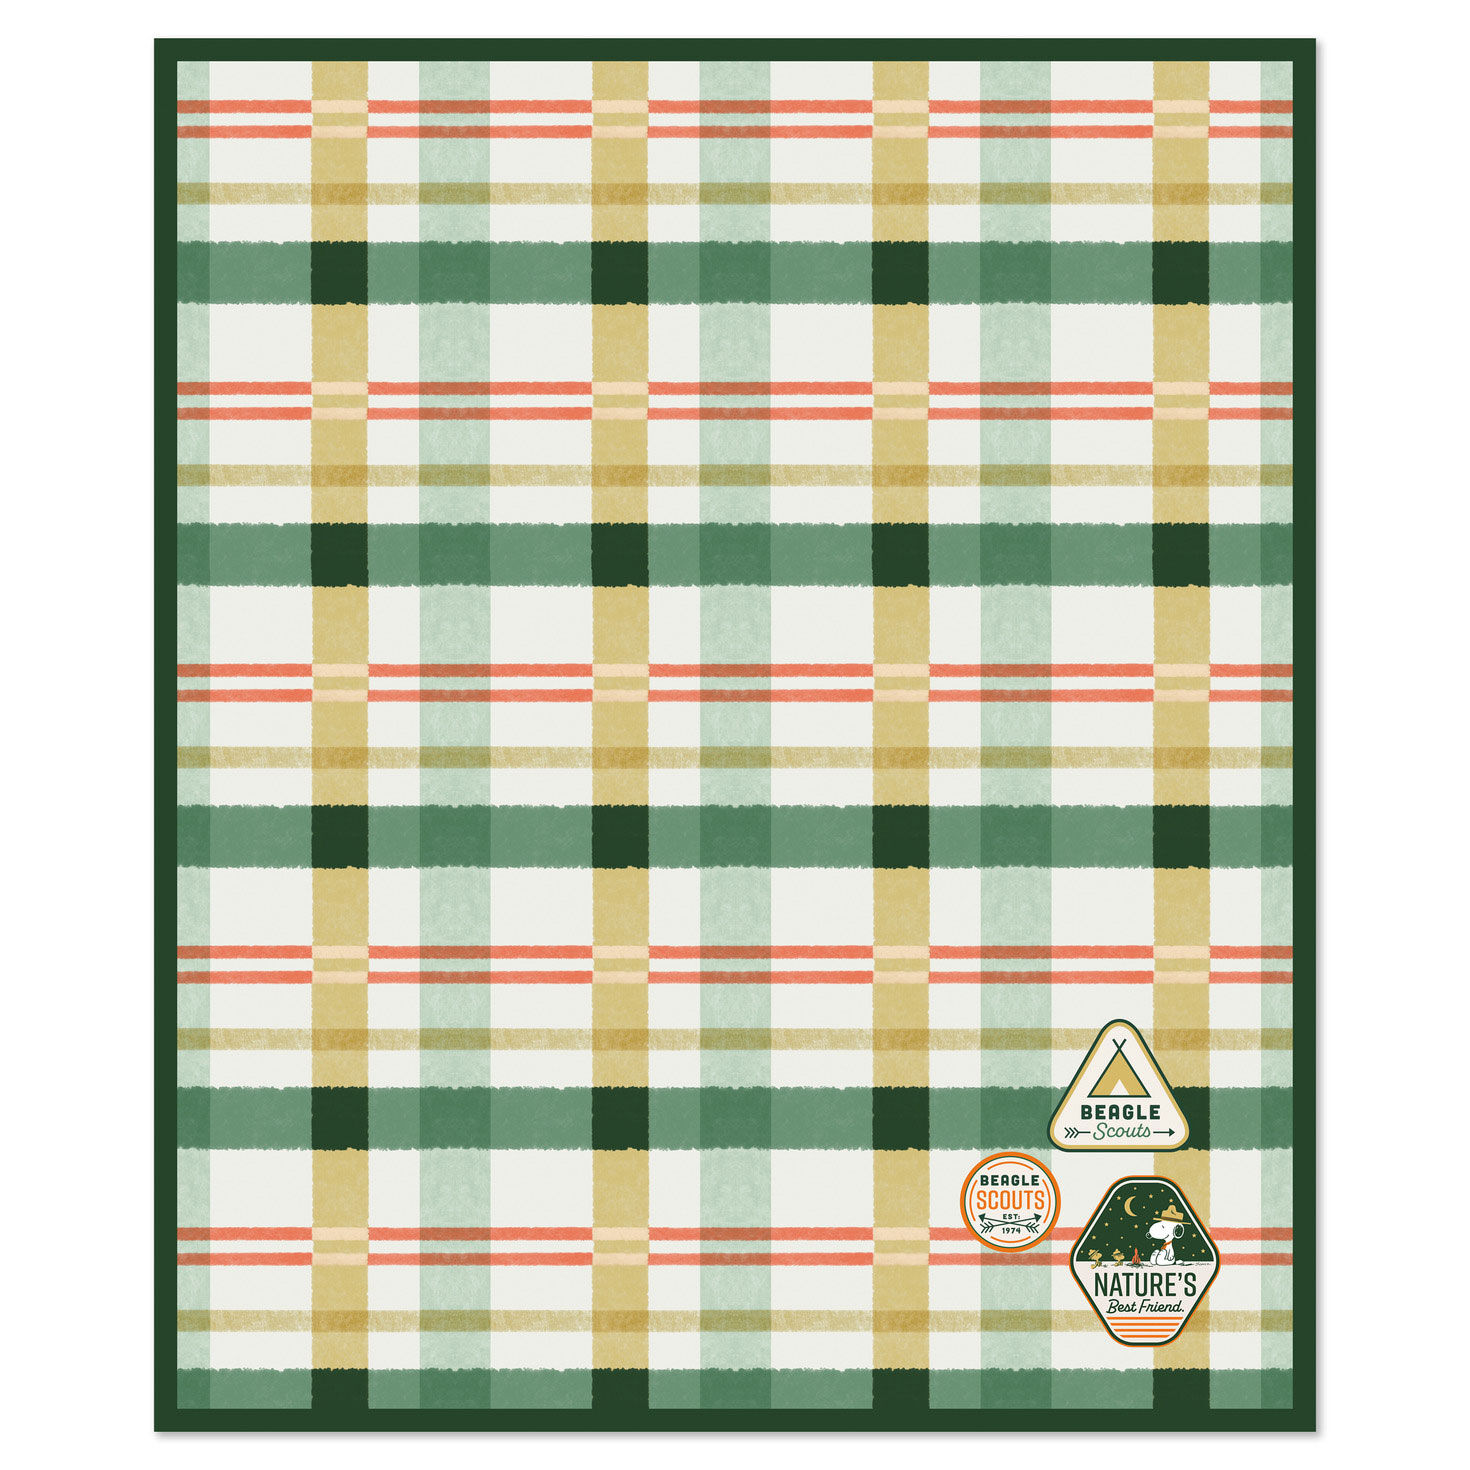 Peanuts® Beagle Scouts Picnic Blanket With Bag for only USD 39.99 | Hallmark